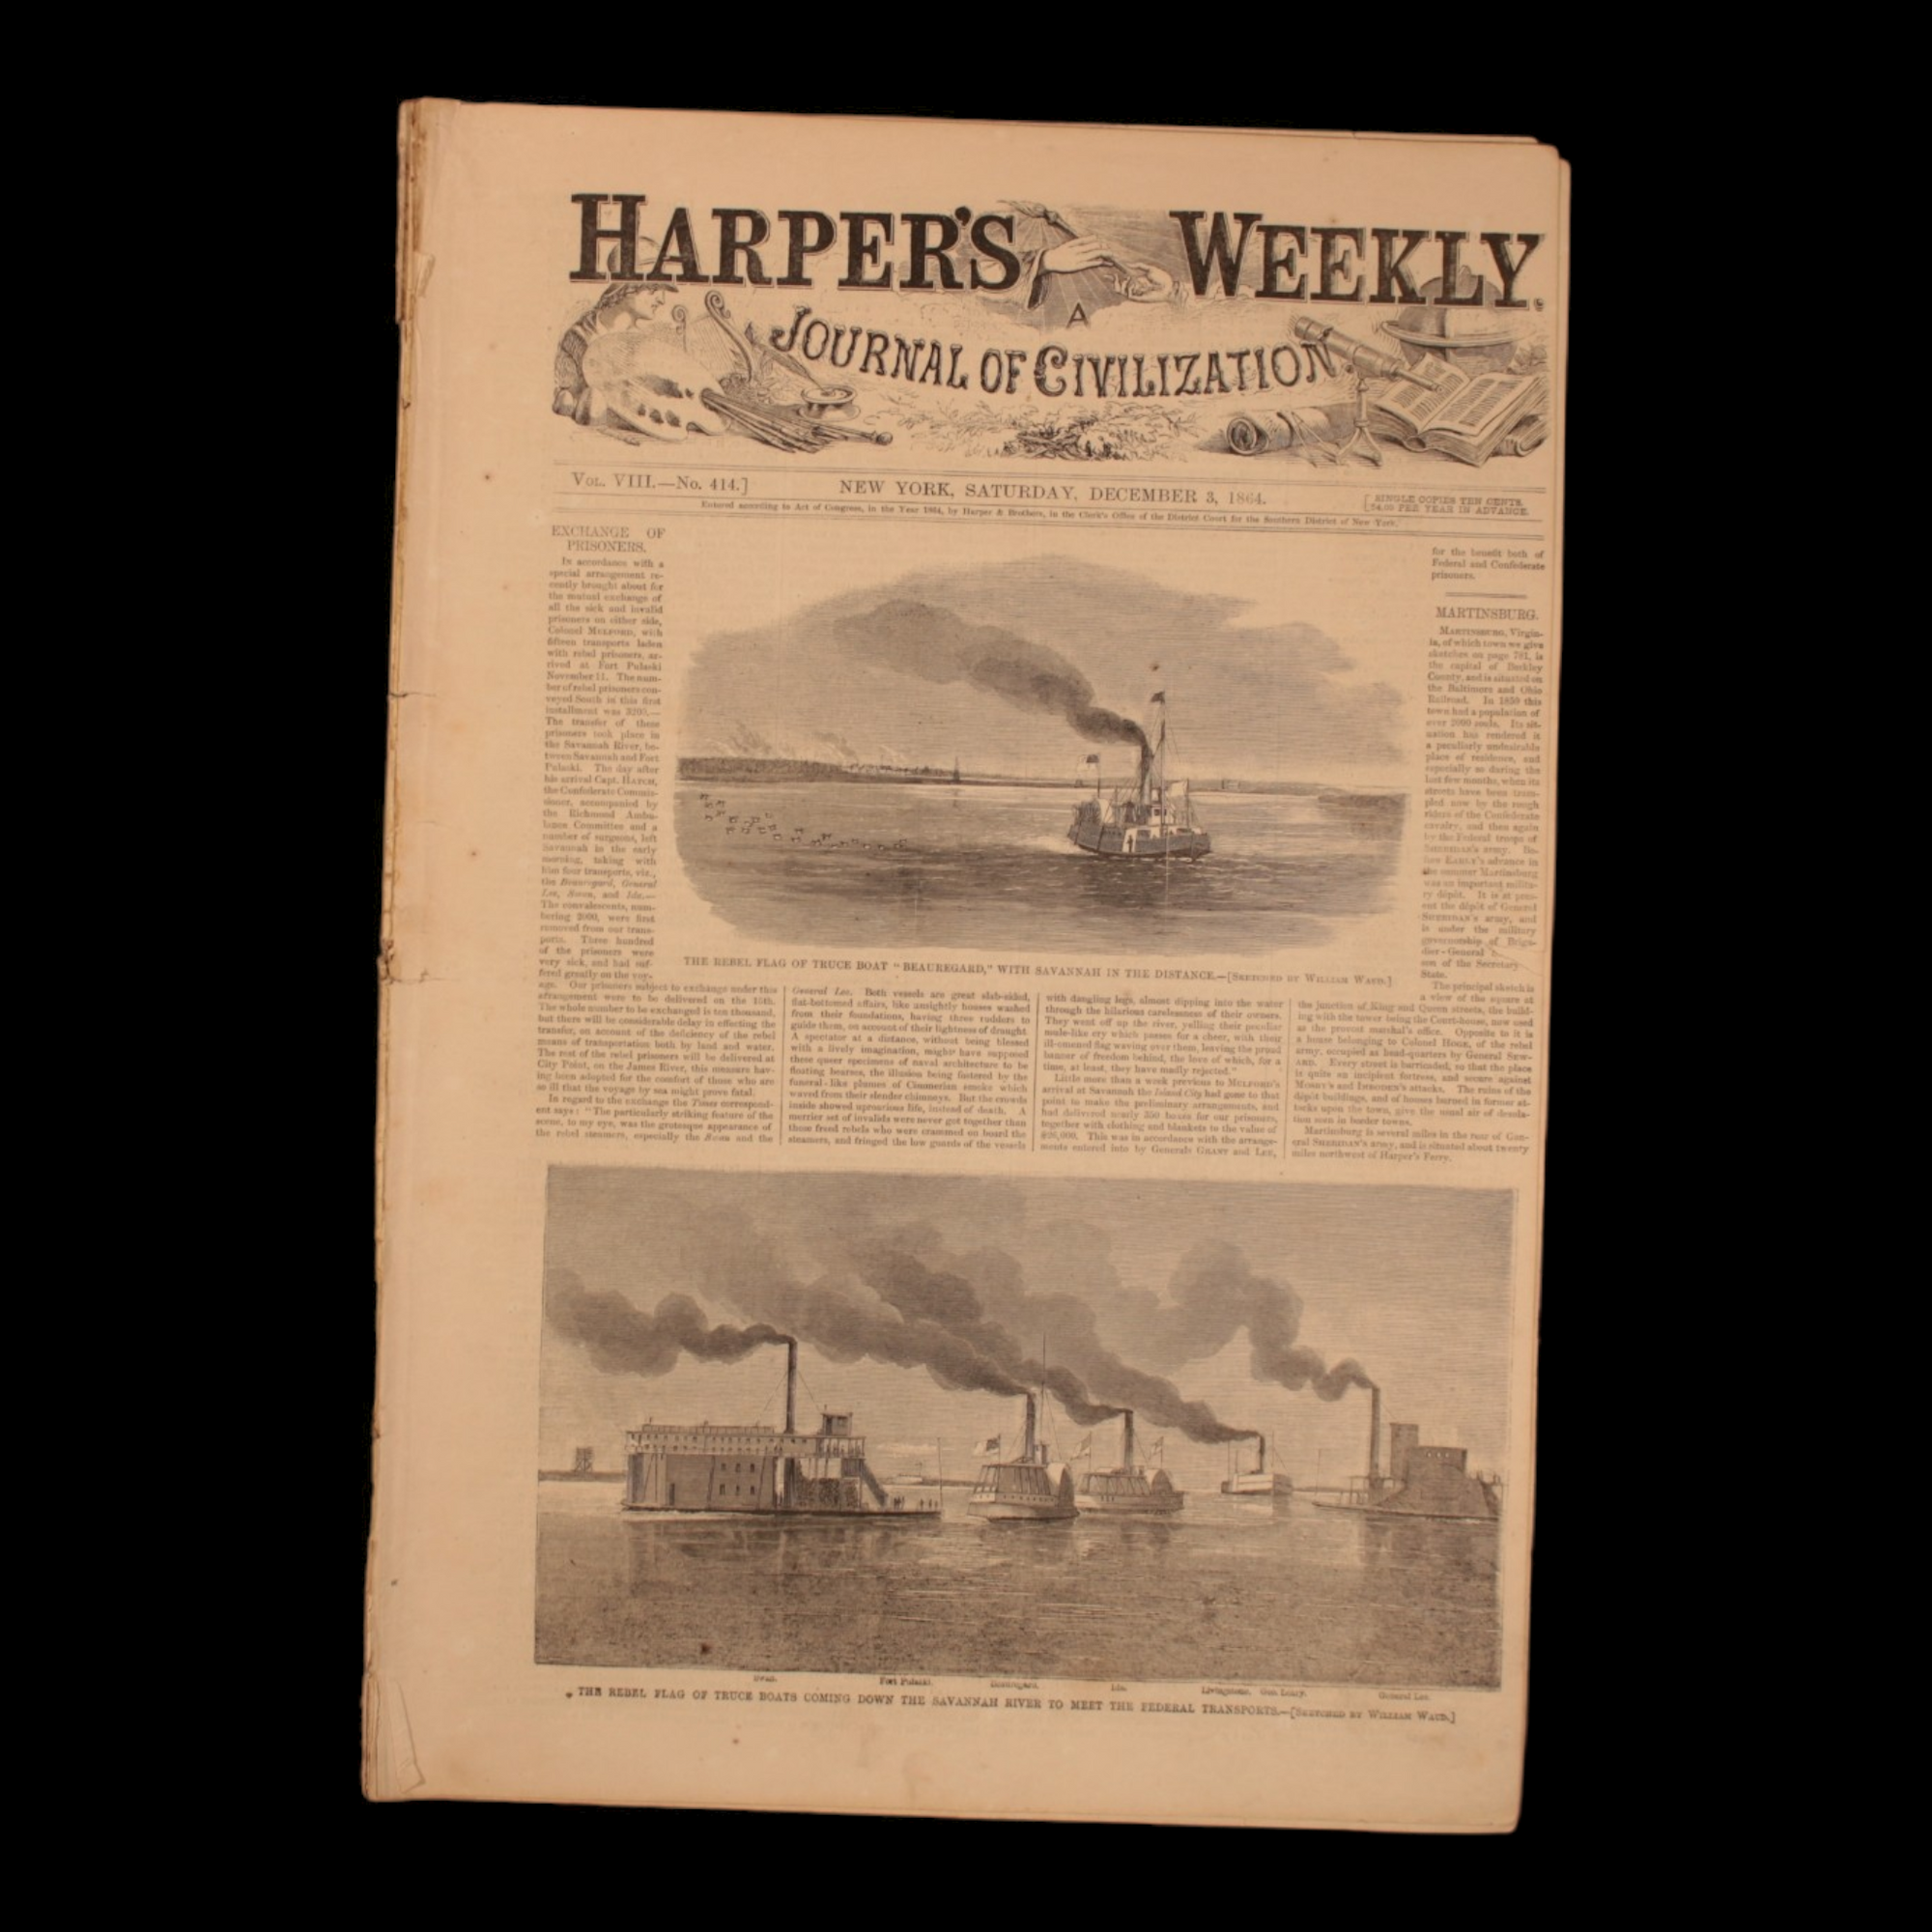 Harper's Weekly — "Rebel Flag of Truce Boats" (Prisoner Swap), Thanksgiving Day Centerfold with Lincoln